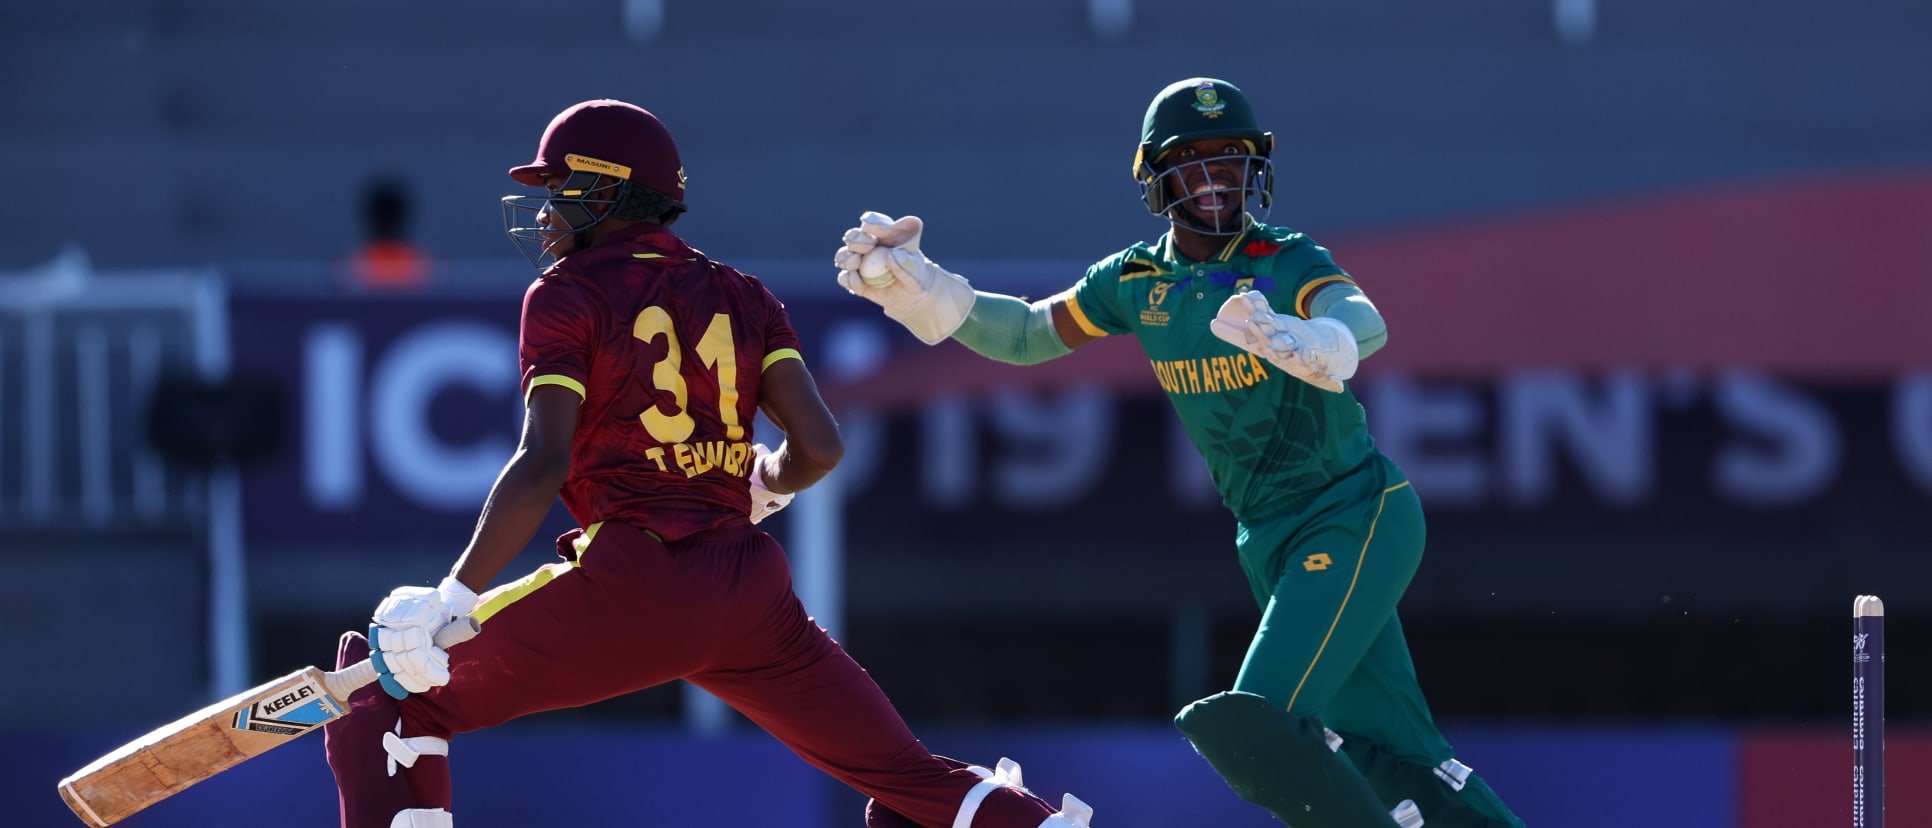 ICC U19 World Cup: South Africa beat West Indies by 31 runs in Potchefstroom